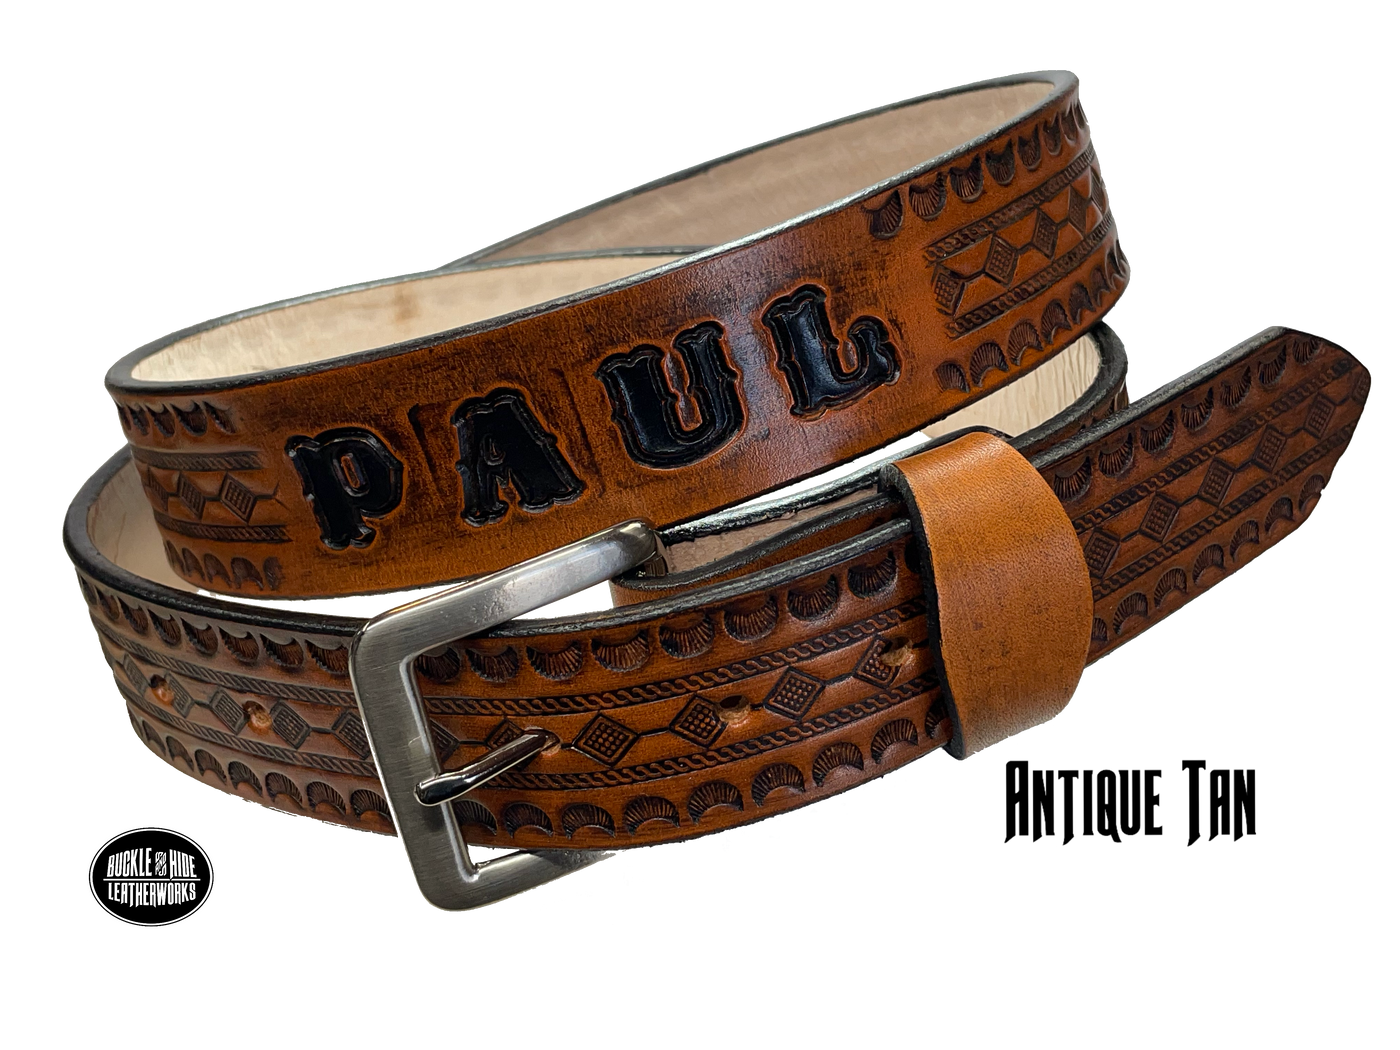 Full grain American vegetable tanned cowhide approx. 1/8"thick. Width 1 1/2" and includes Antique Nickle plated Solid Brass buckle Hand Finished in 3 color options Smooth burnished painted edges Choose with or without name, if without name, design will cover entire length of belt For name Type name desired on belt in "Type Name Here" section, no more than 8 letters maximum Buckle snaps in place for easy changing if desired Made in our Smyrna, TN, USA shop